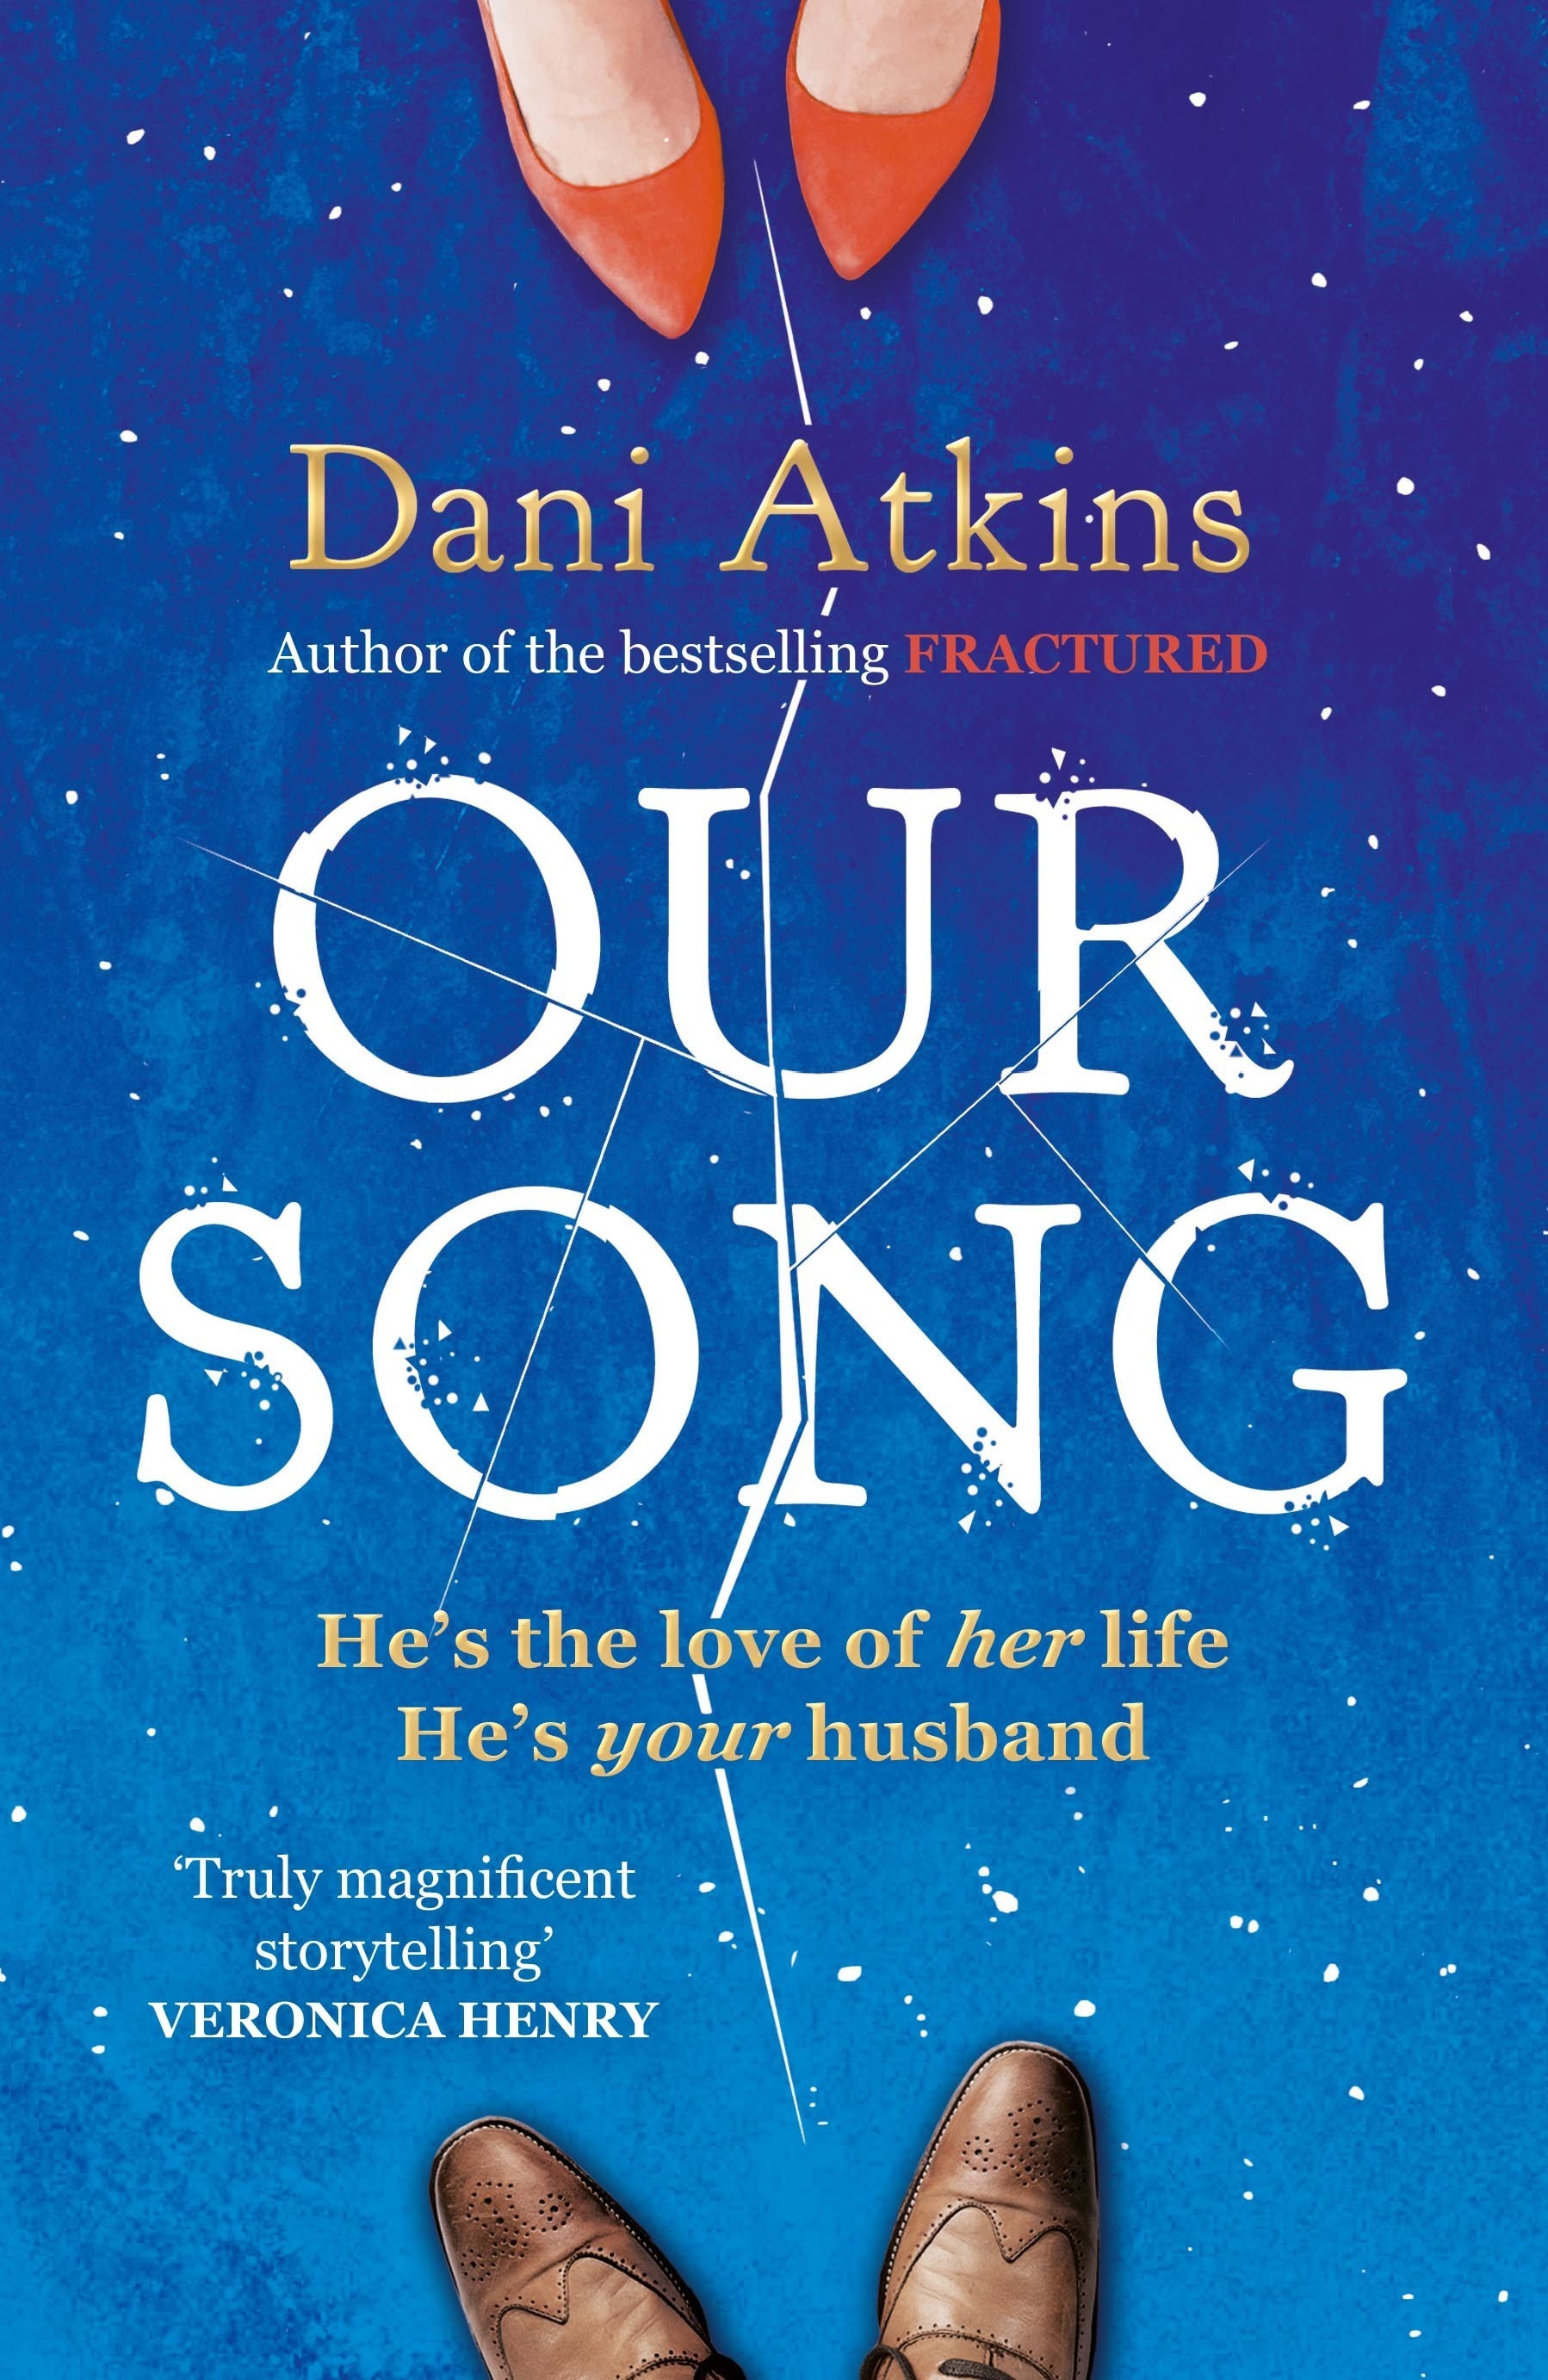 Author Interview: Dani Atkins on Fate and Seizing the Day